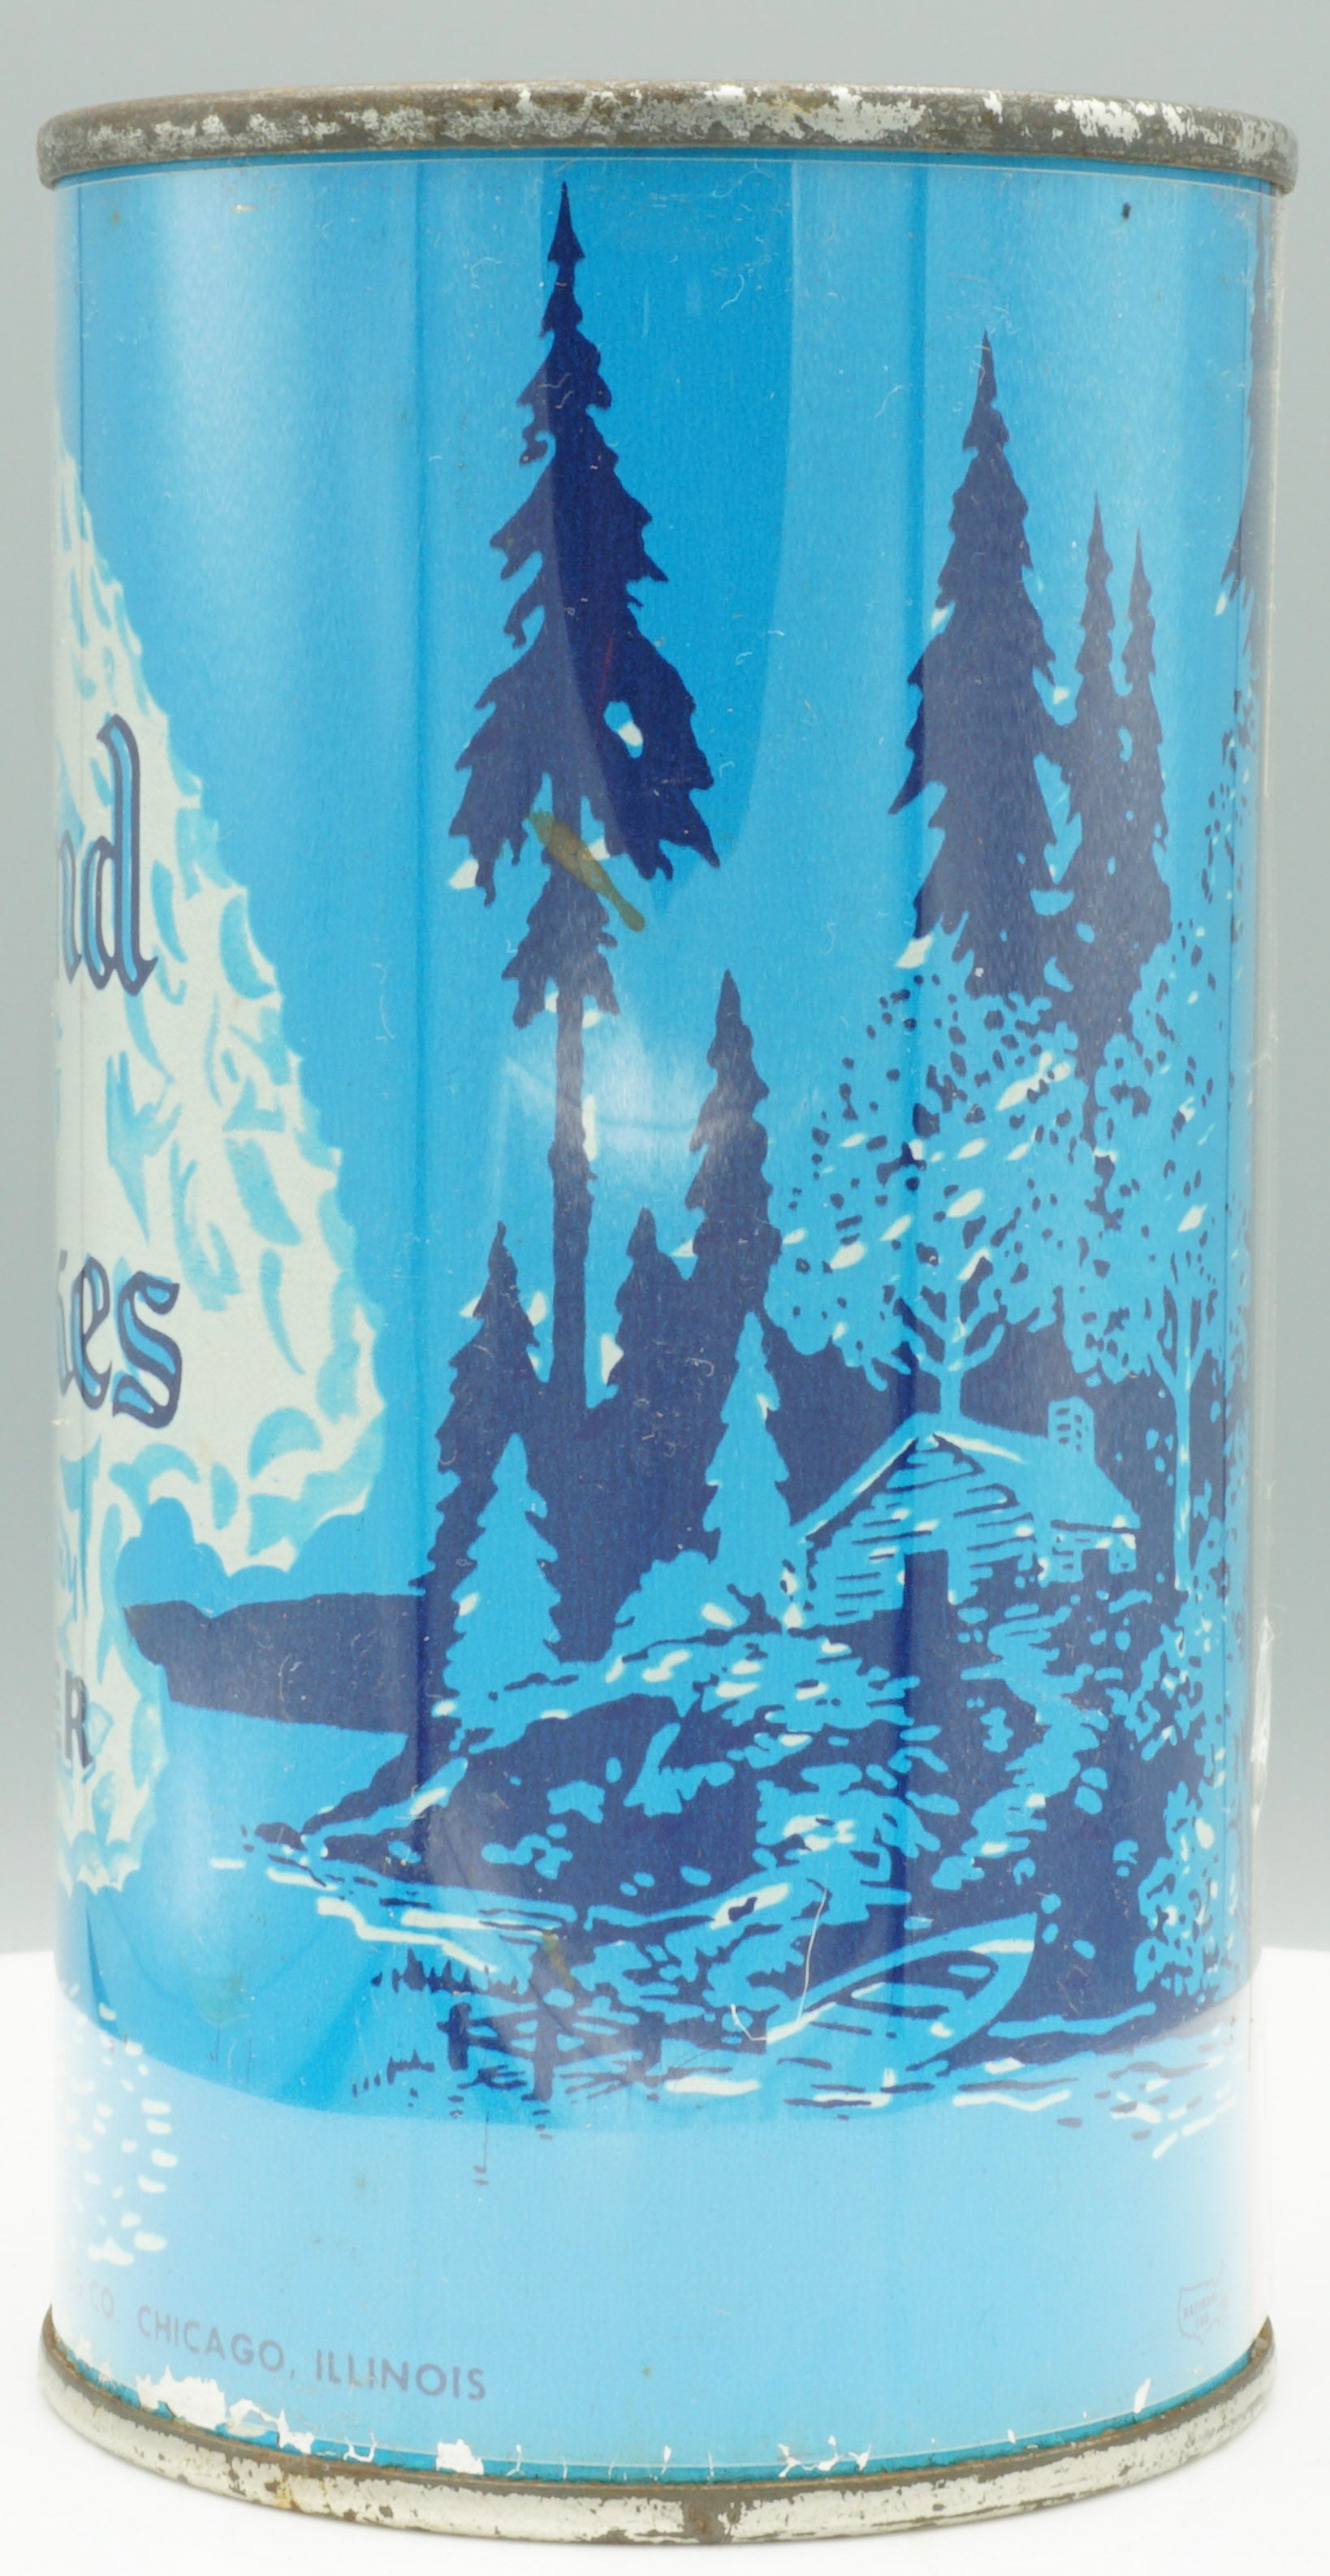 Land of Lakes pale dry beer, USBC 90-39 Grade 1/1-